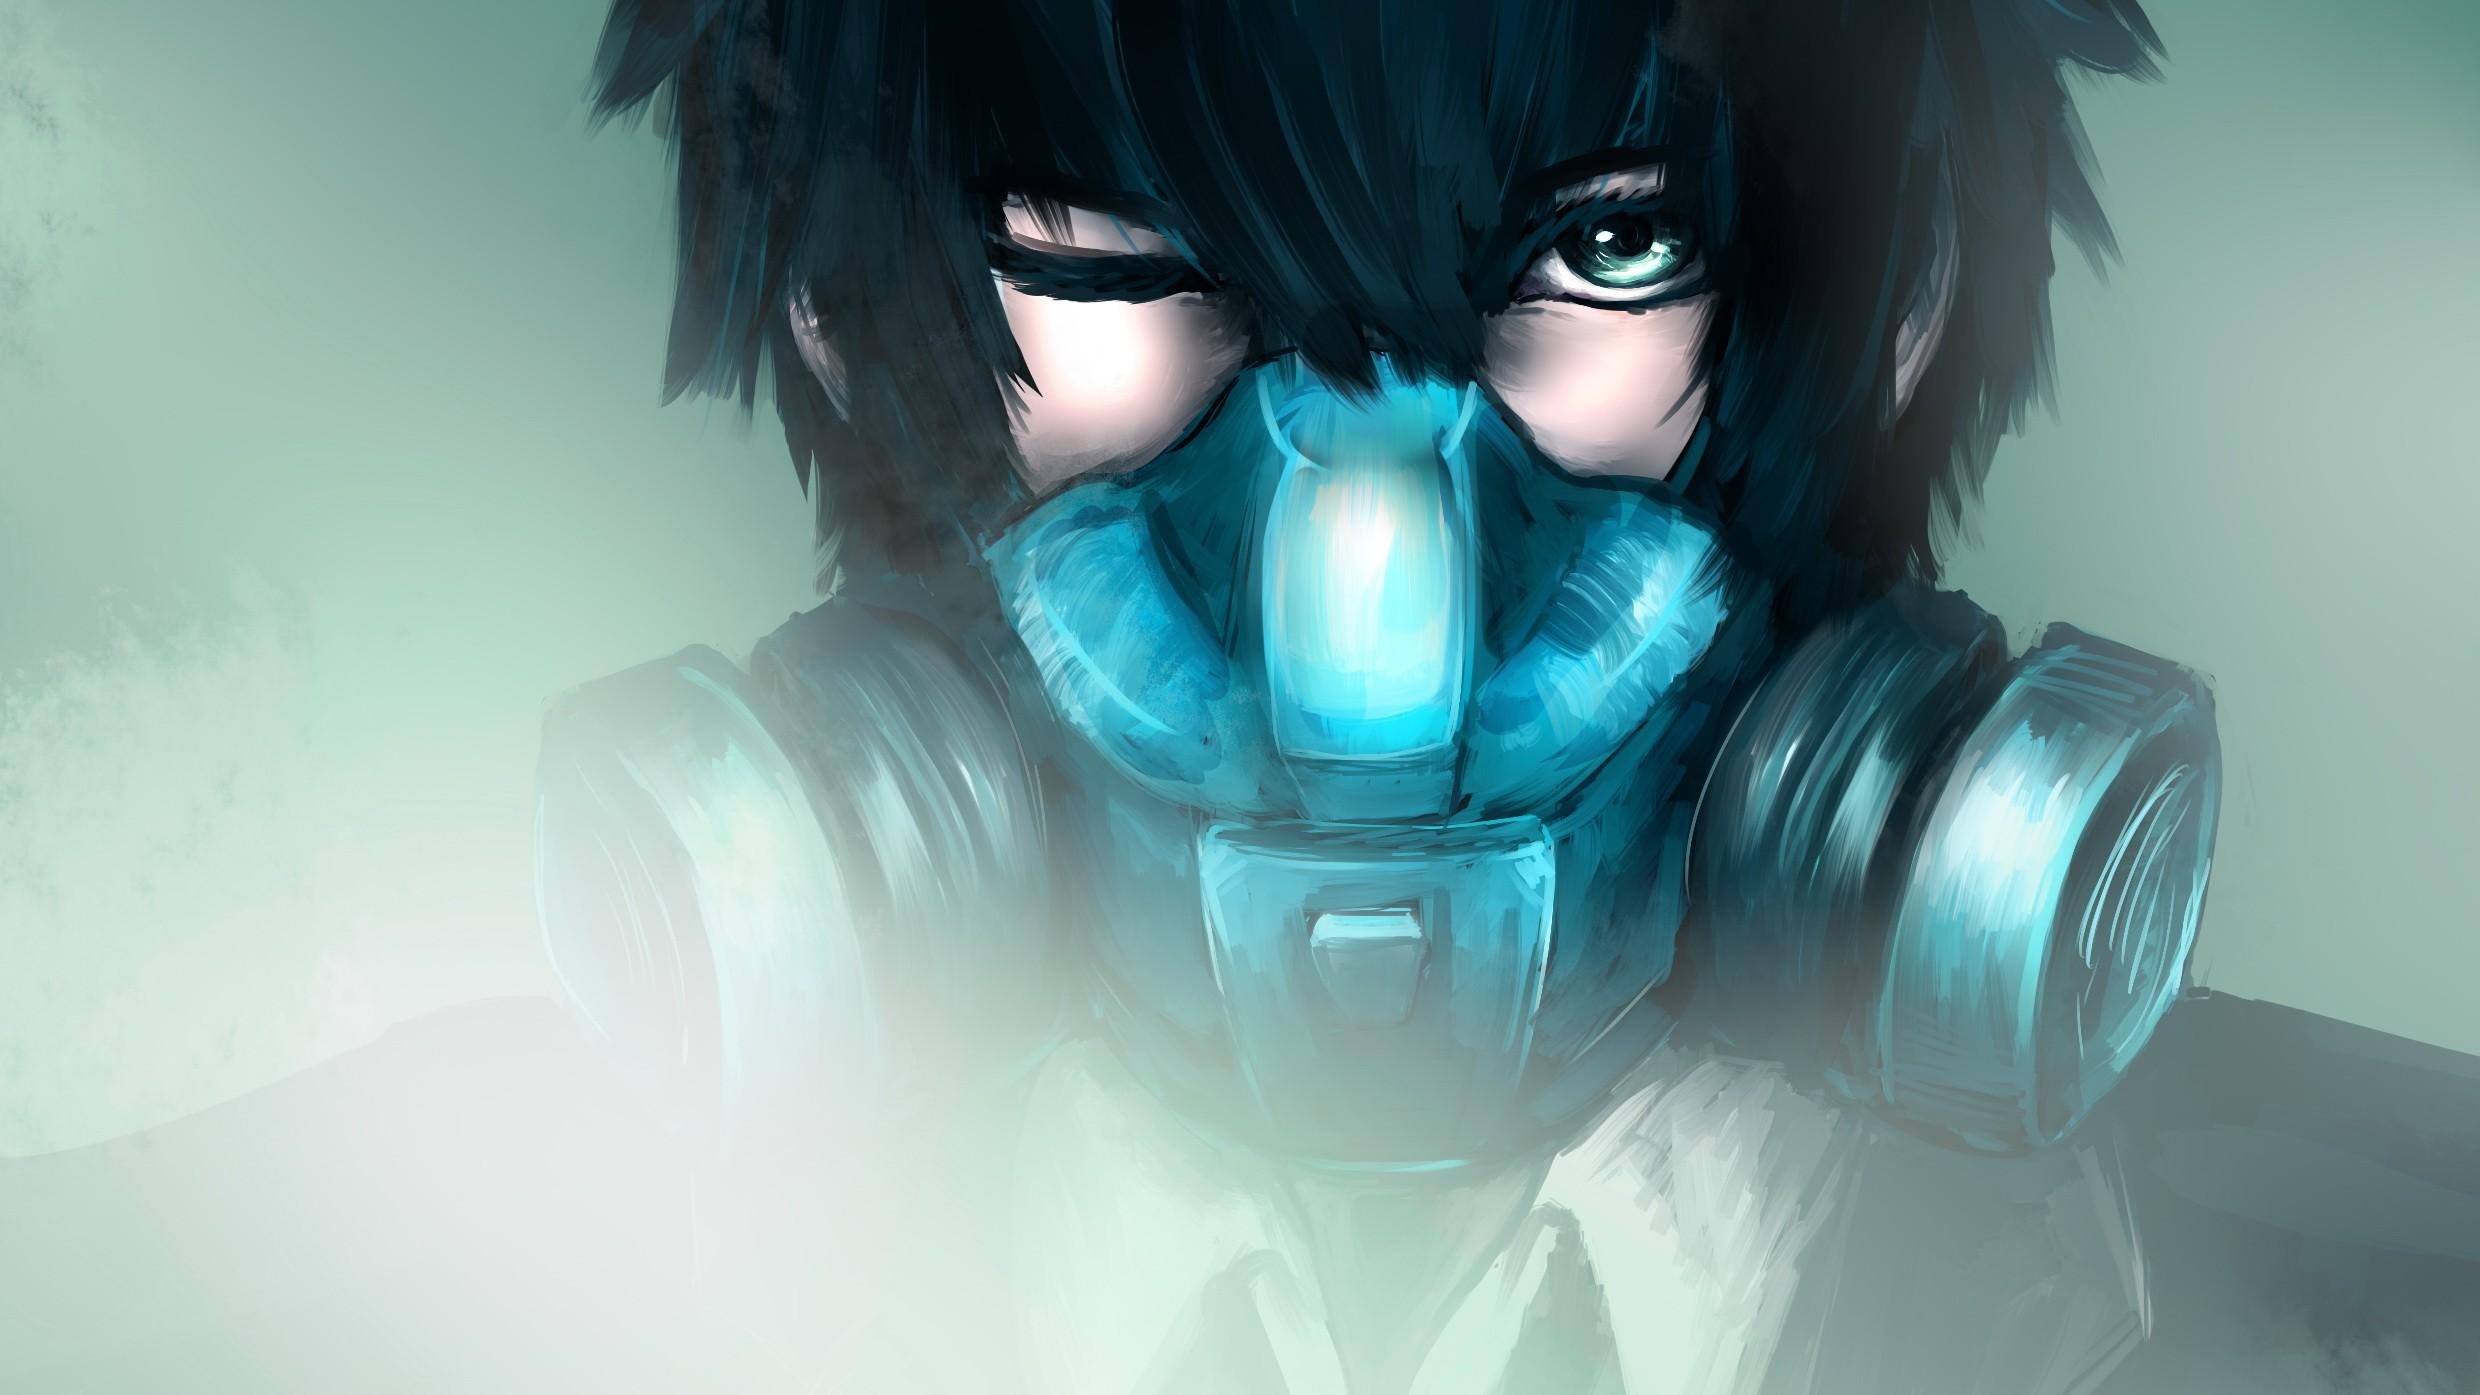 Close Up, Suit, Tie, Gas Masks, Green Eyes, Short Hair, Anime Boys